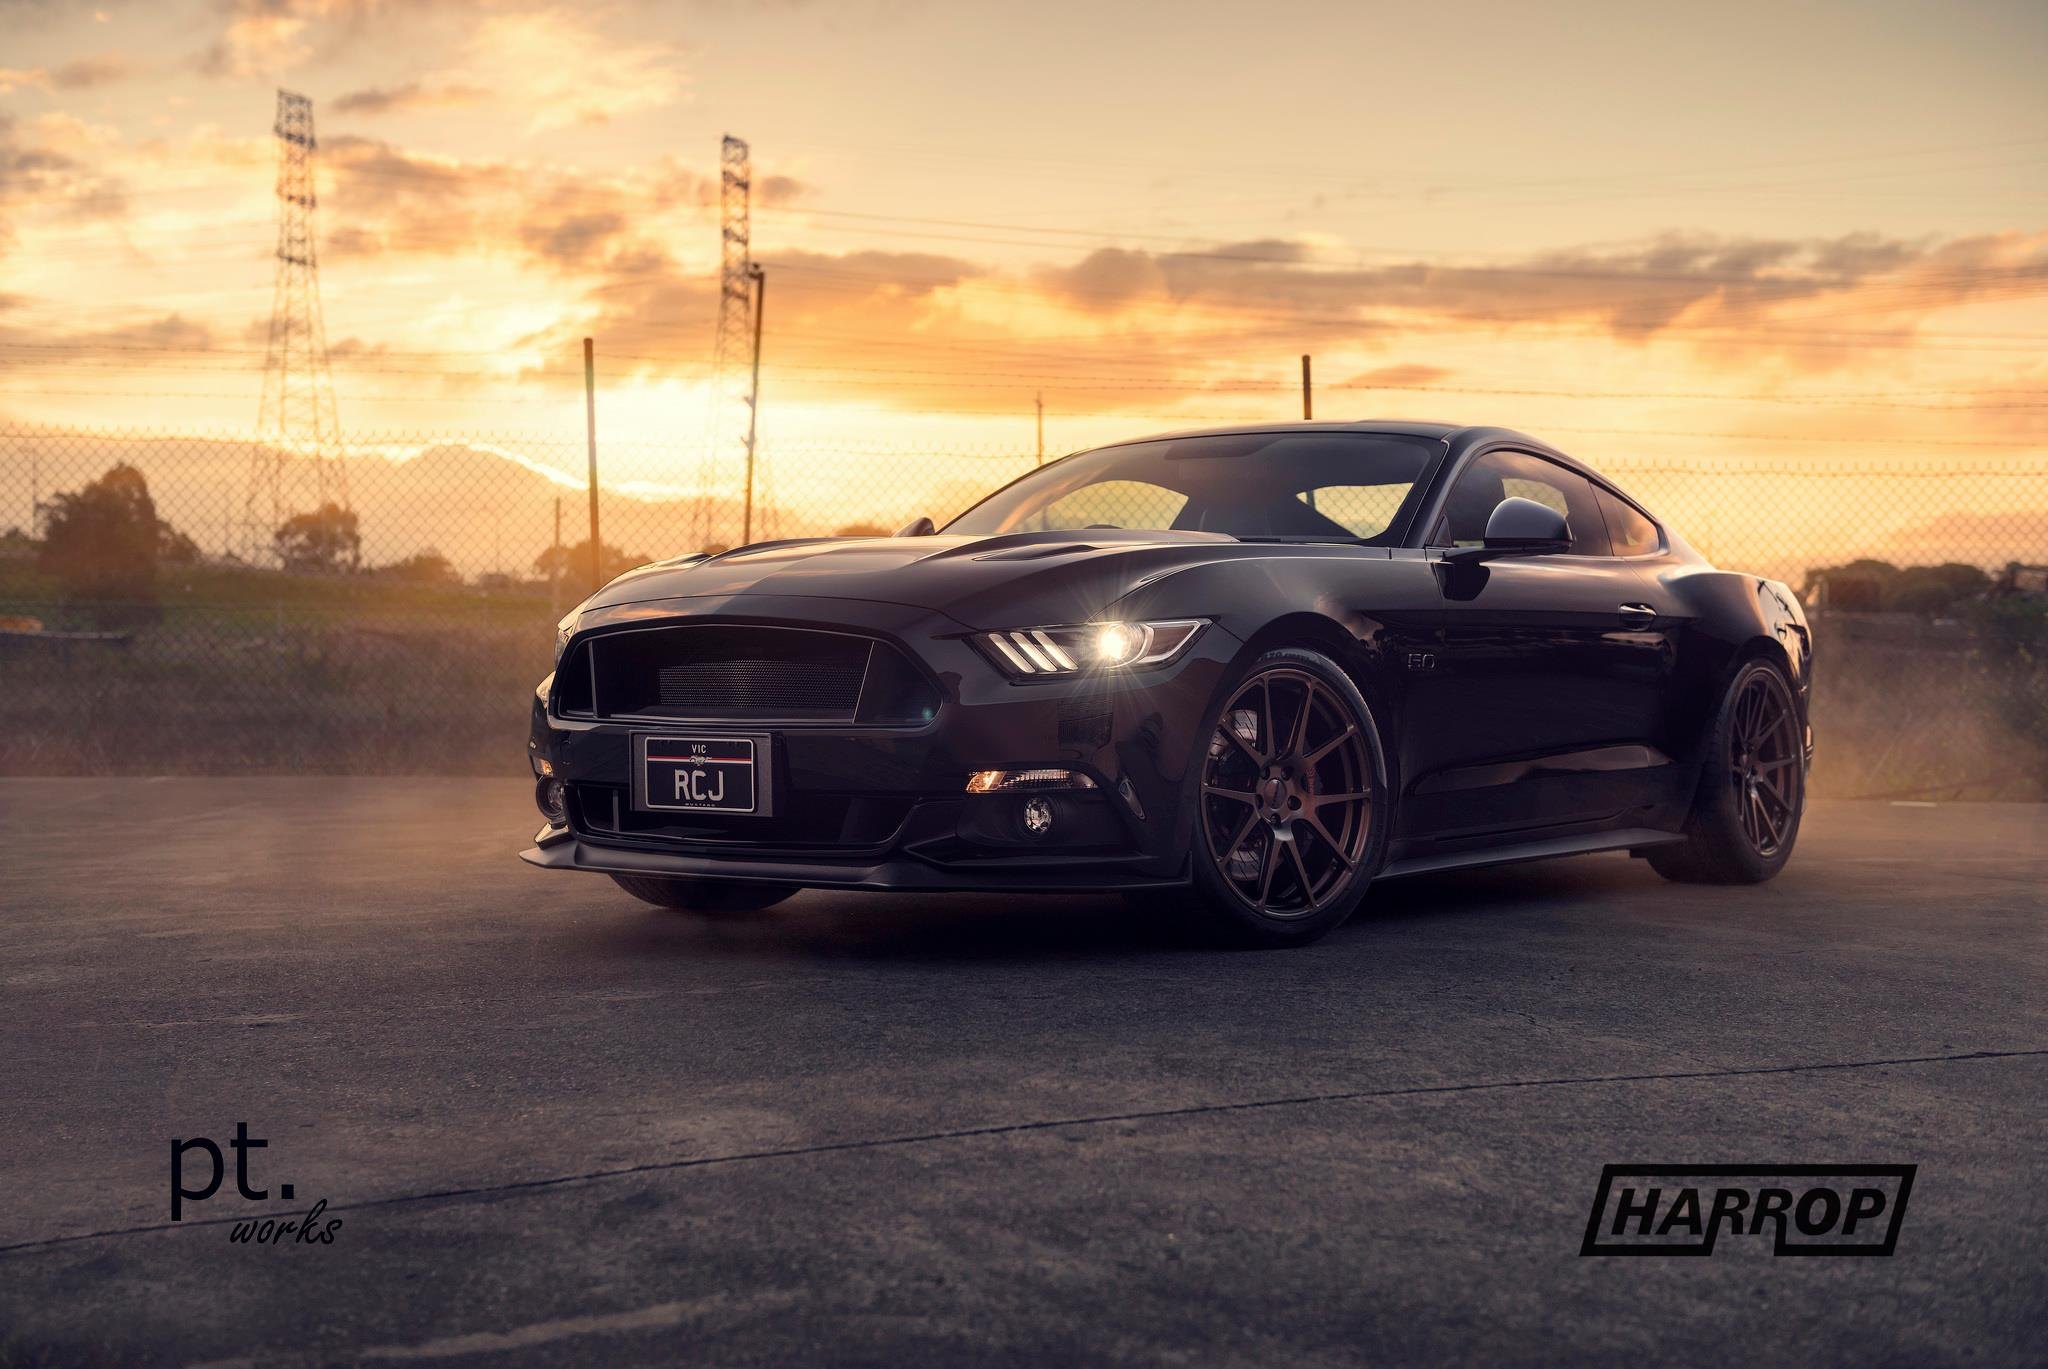 Black Ford Mustang 5.0 with Aftermarket Headlights - Photo by PT works